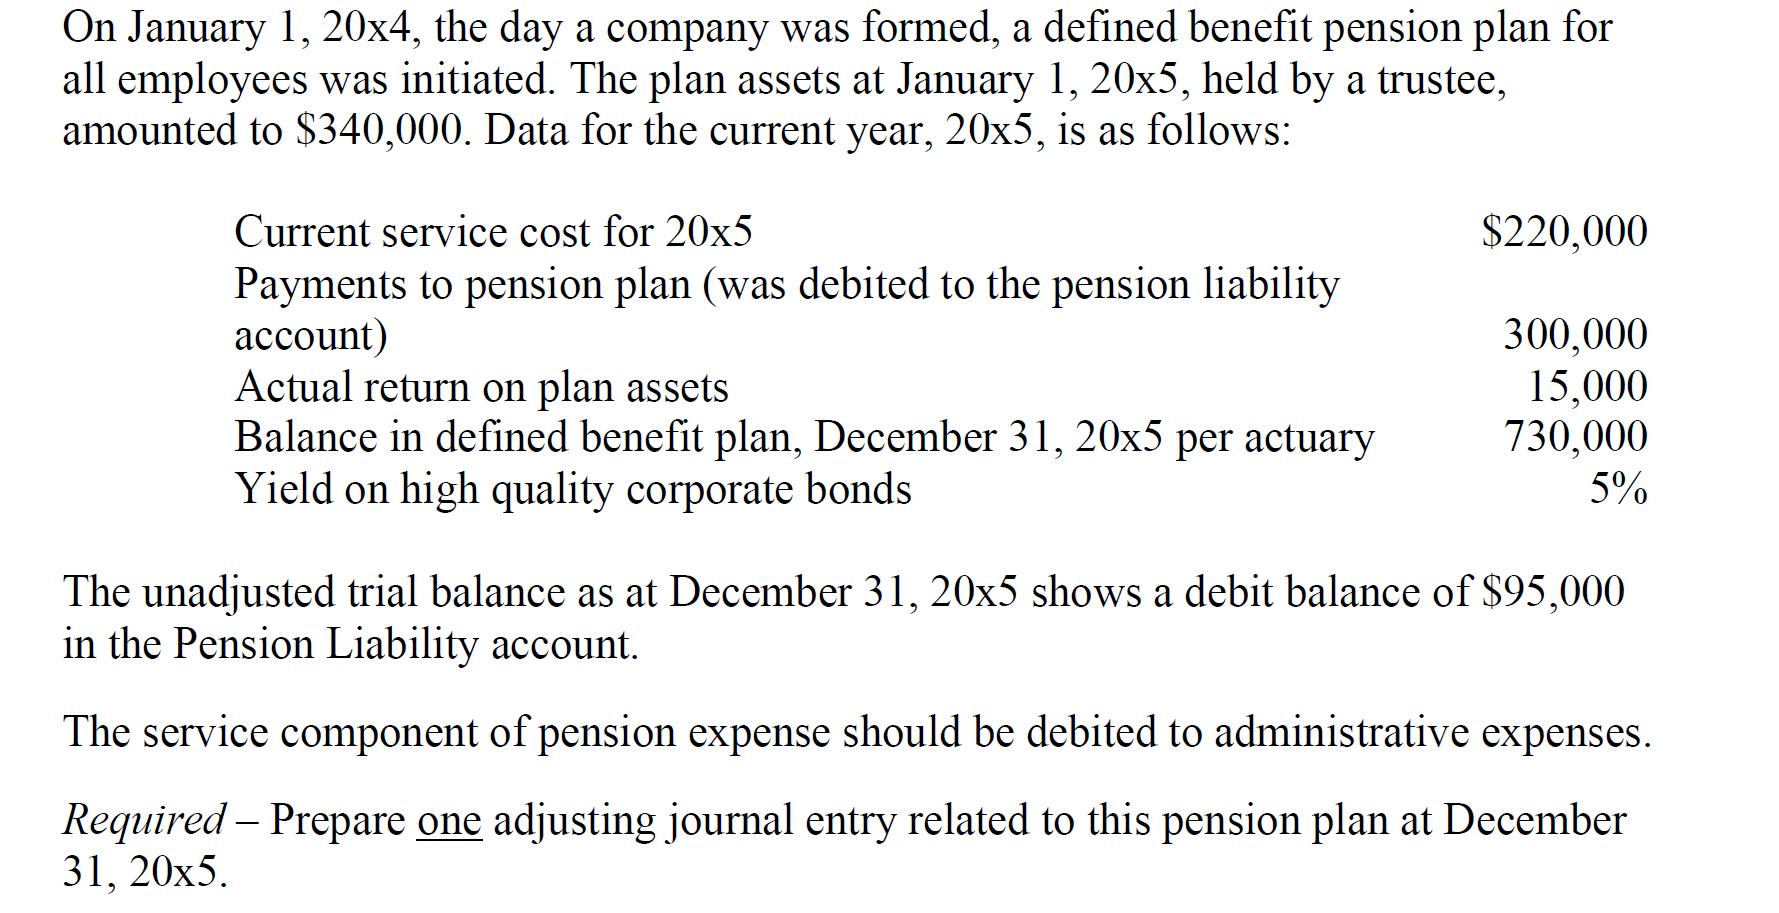 On January 1, 20x4, the day a company was formed, a defined benefit pension plan for all employees was initiated. The plan as